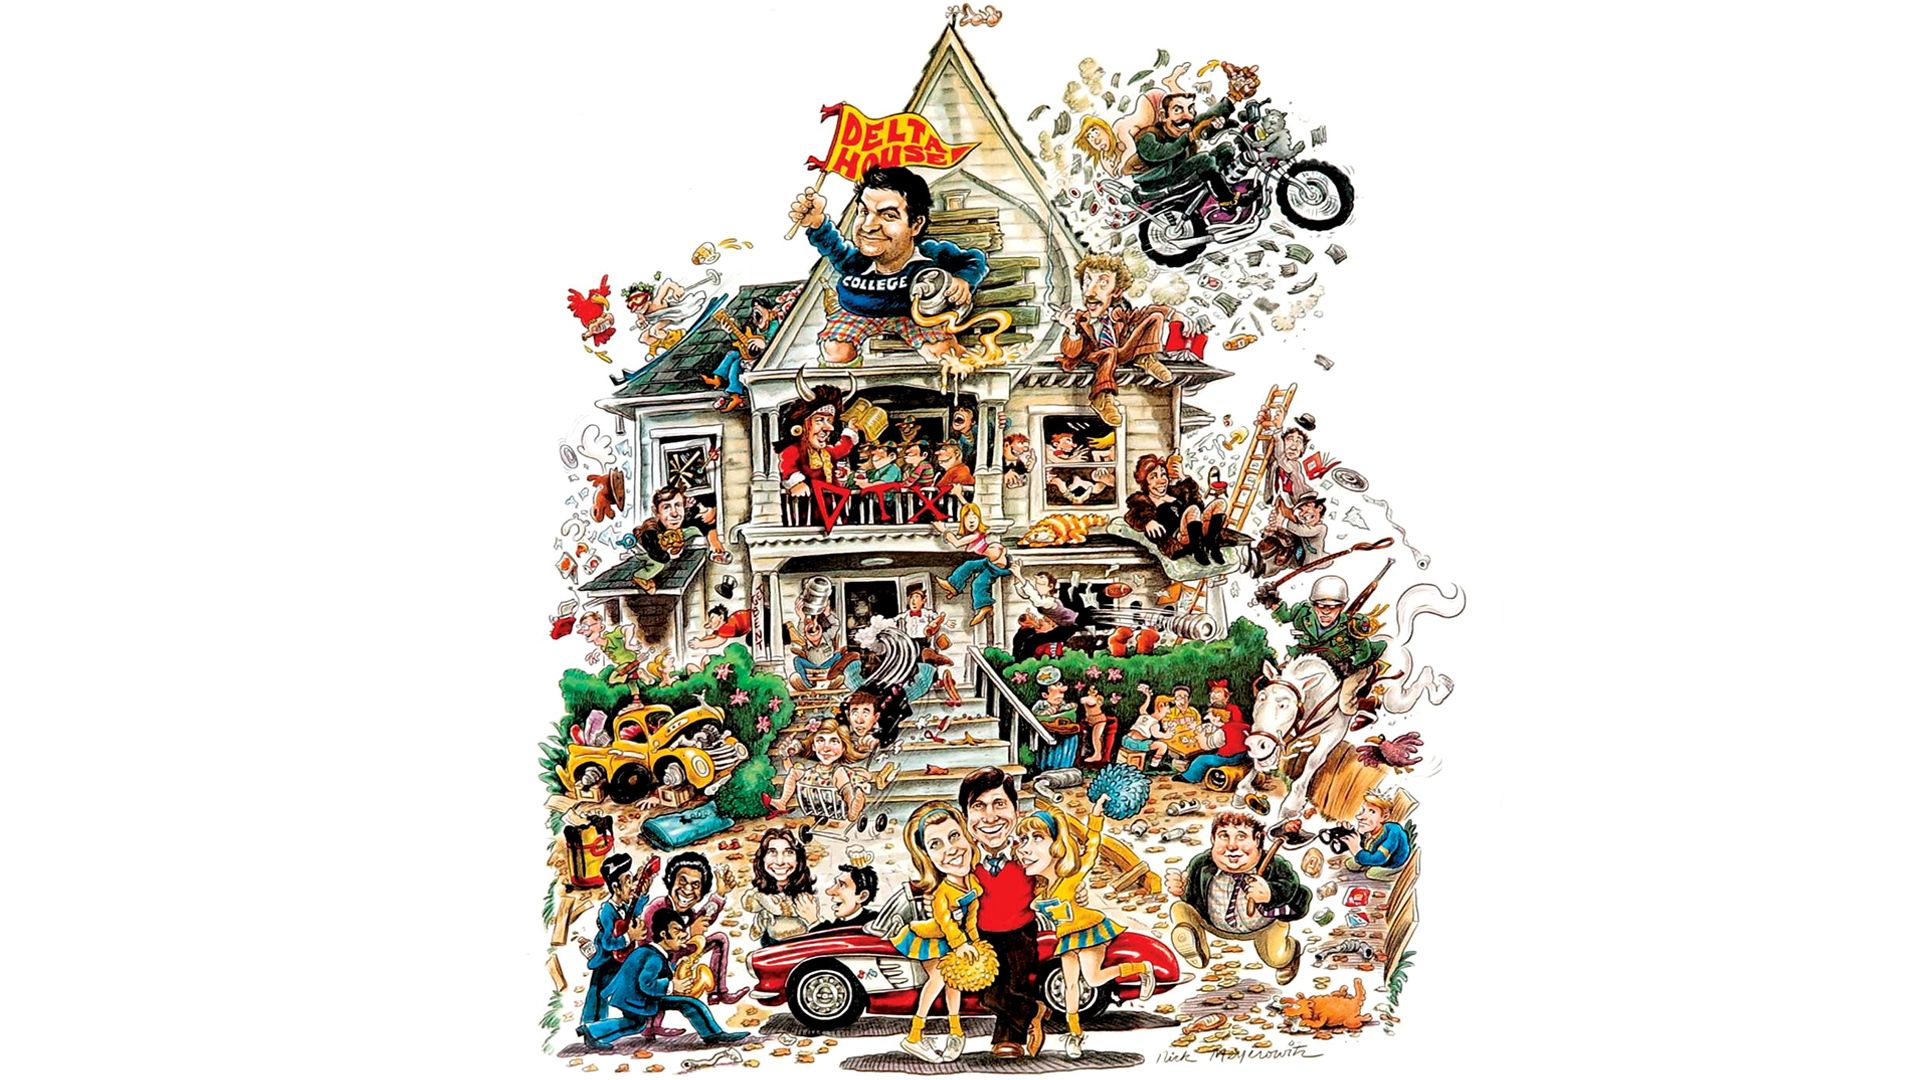 National Lampoon's Animal House background